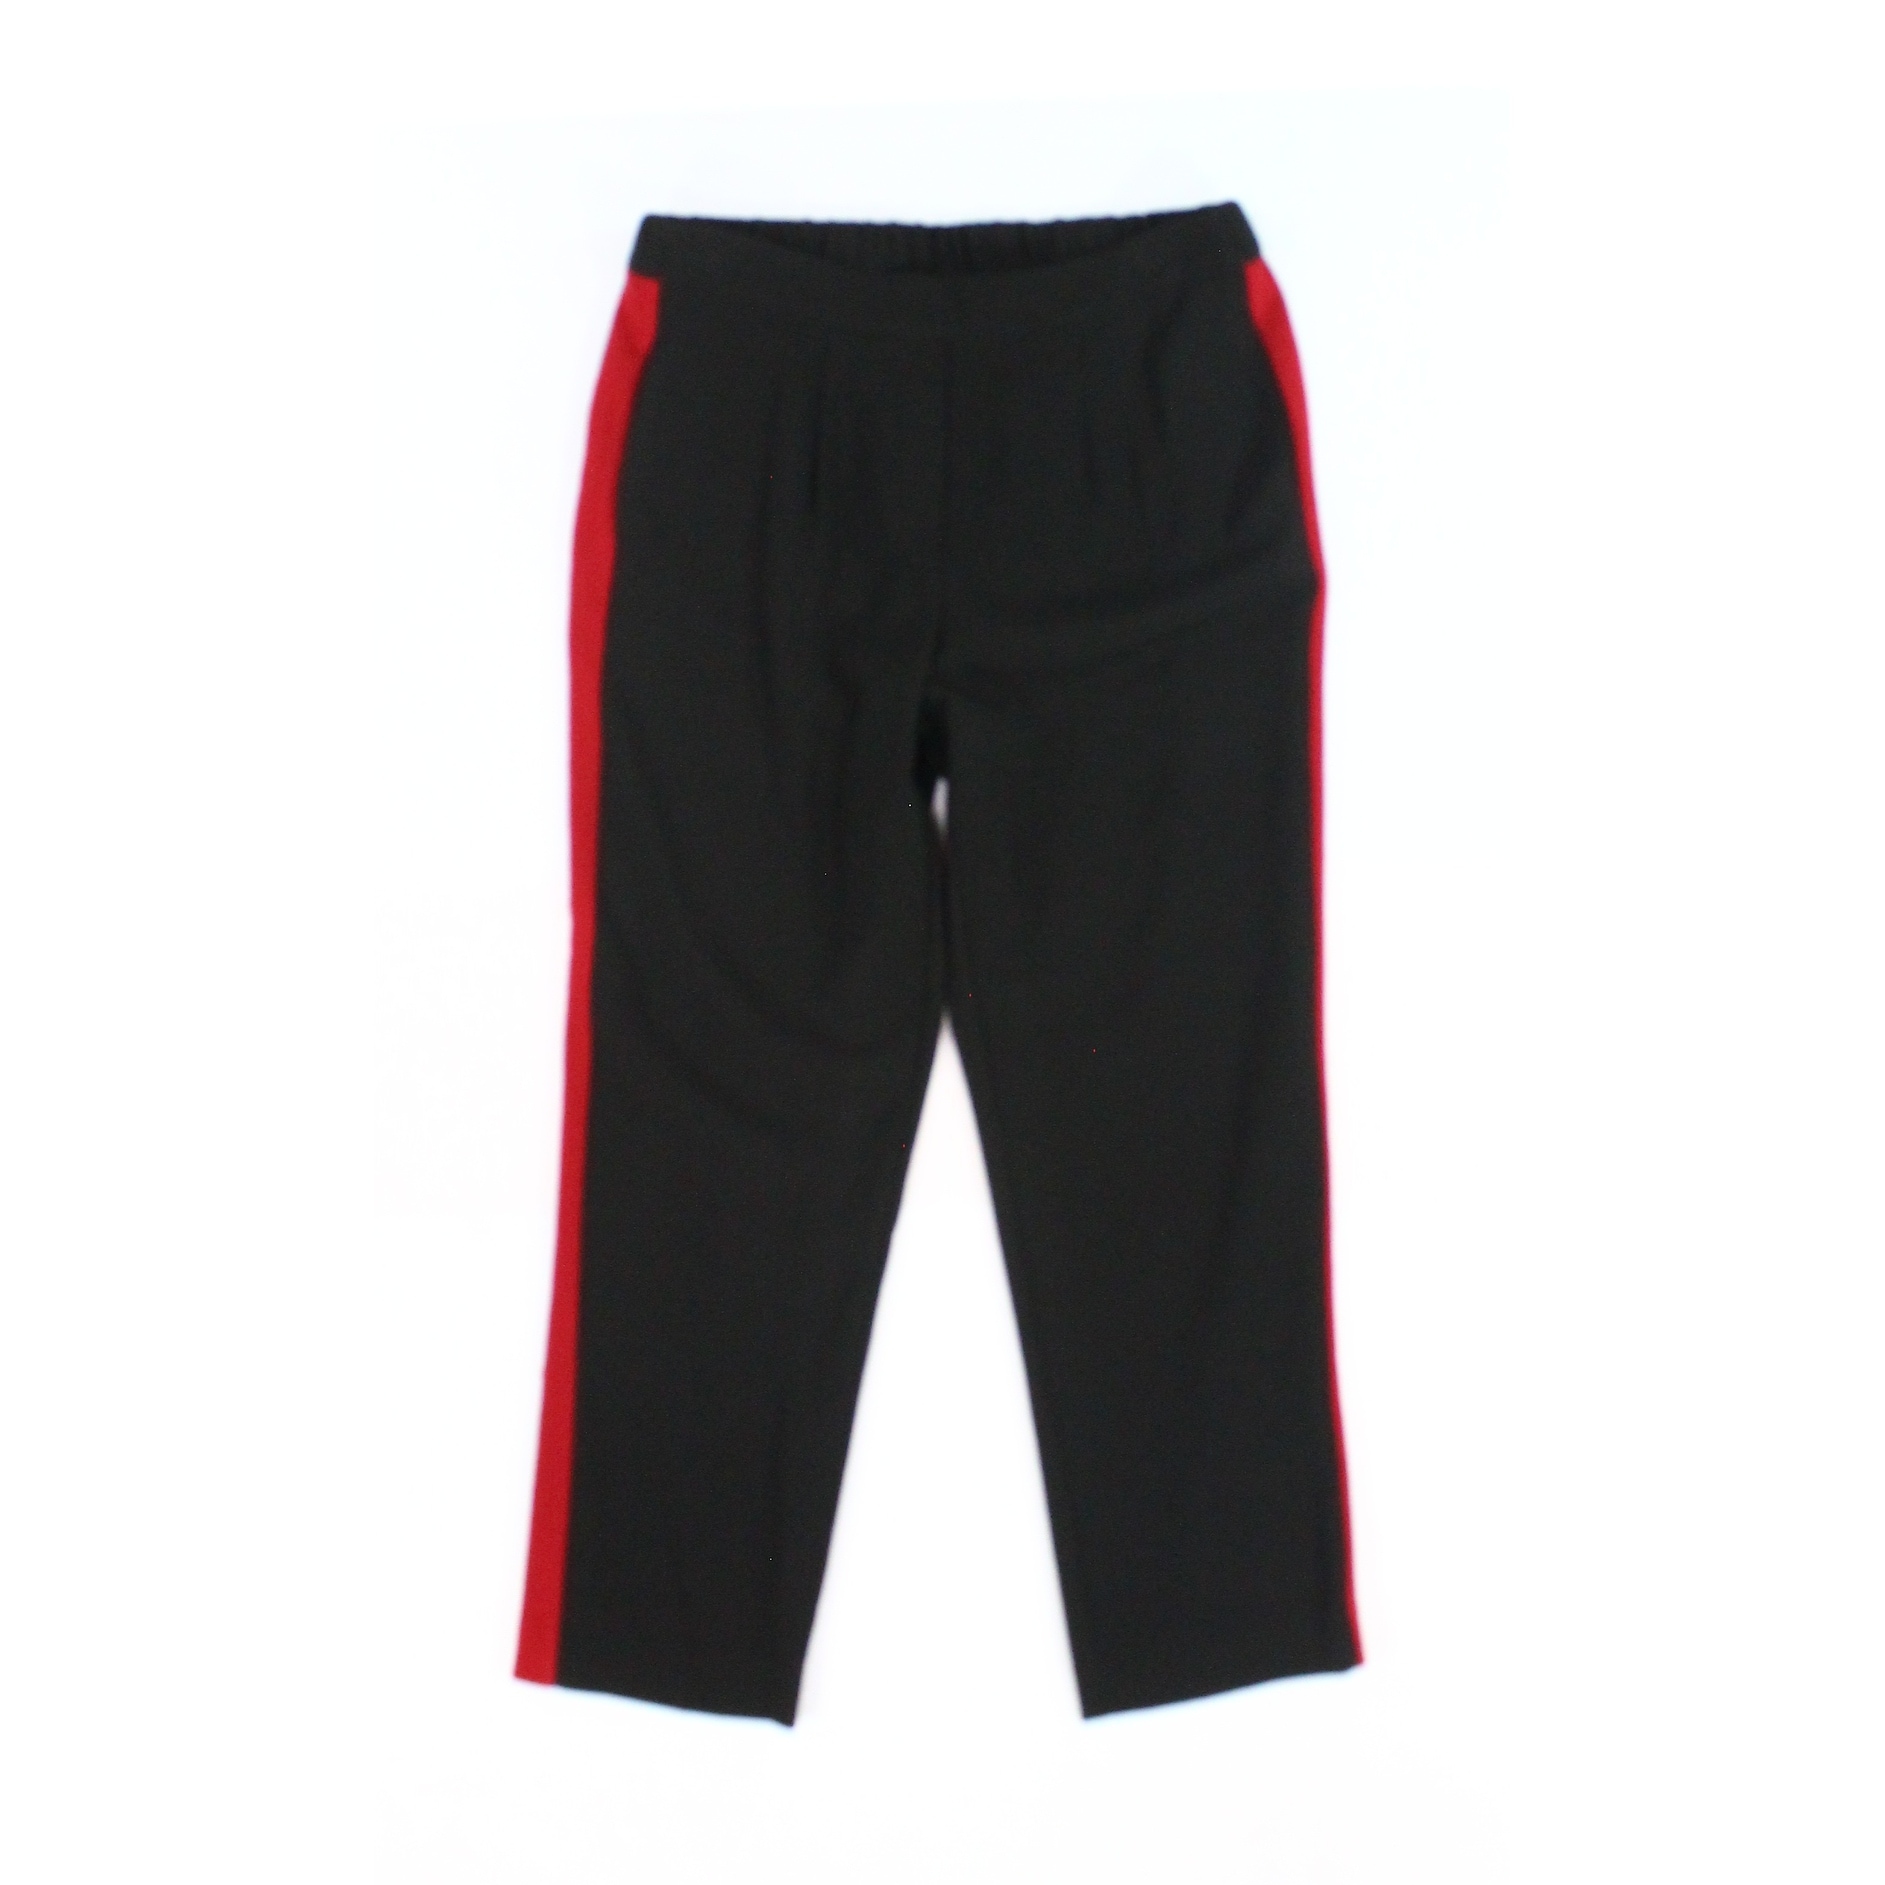 black pants with red stripe womens